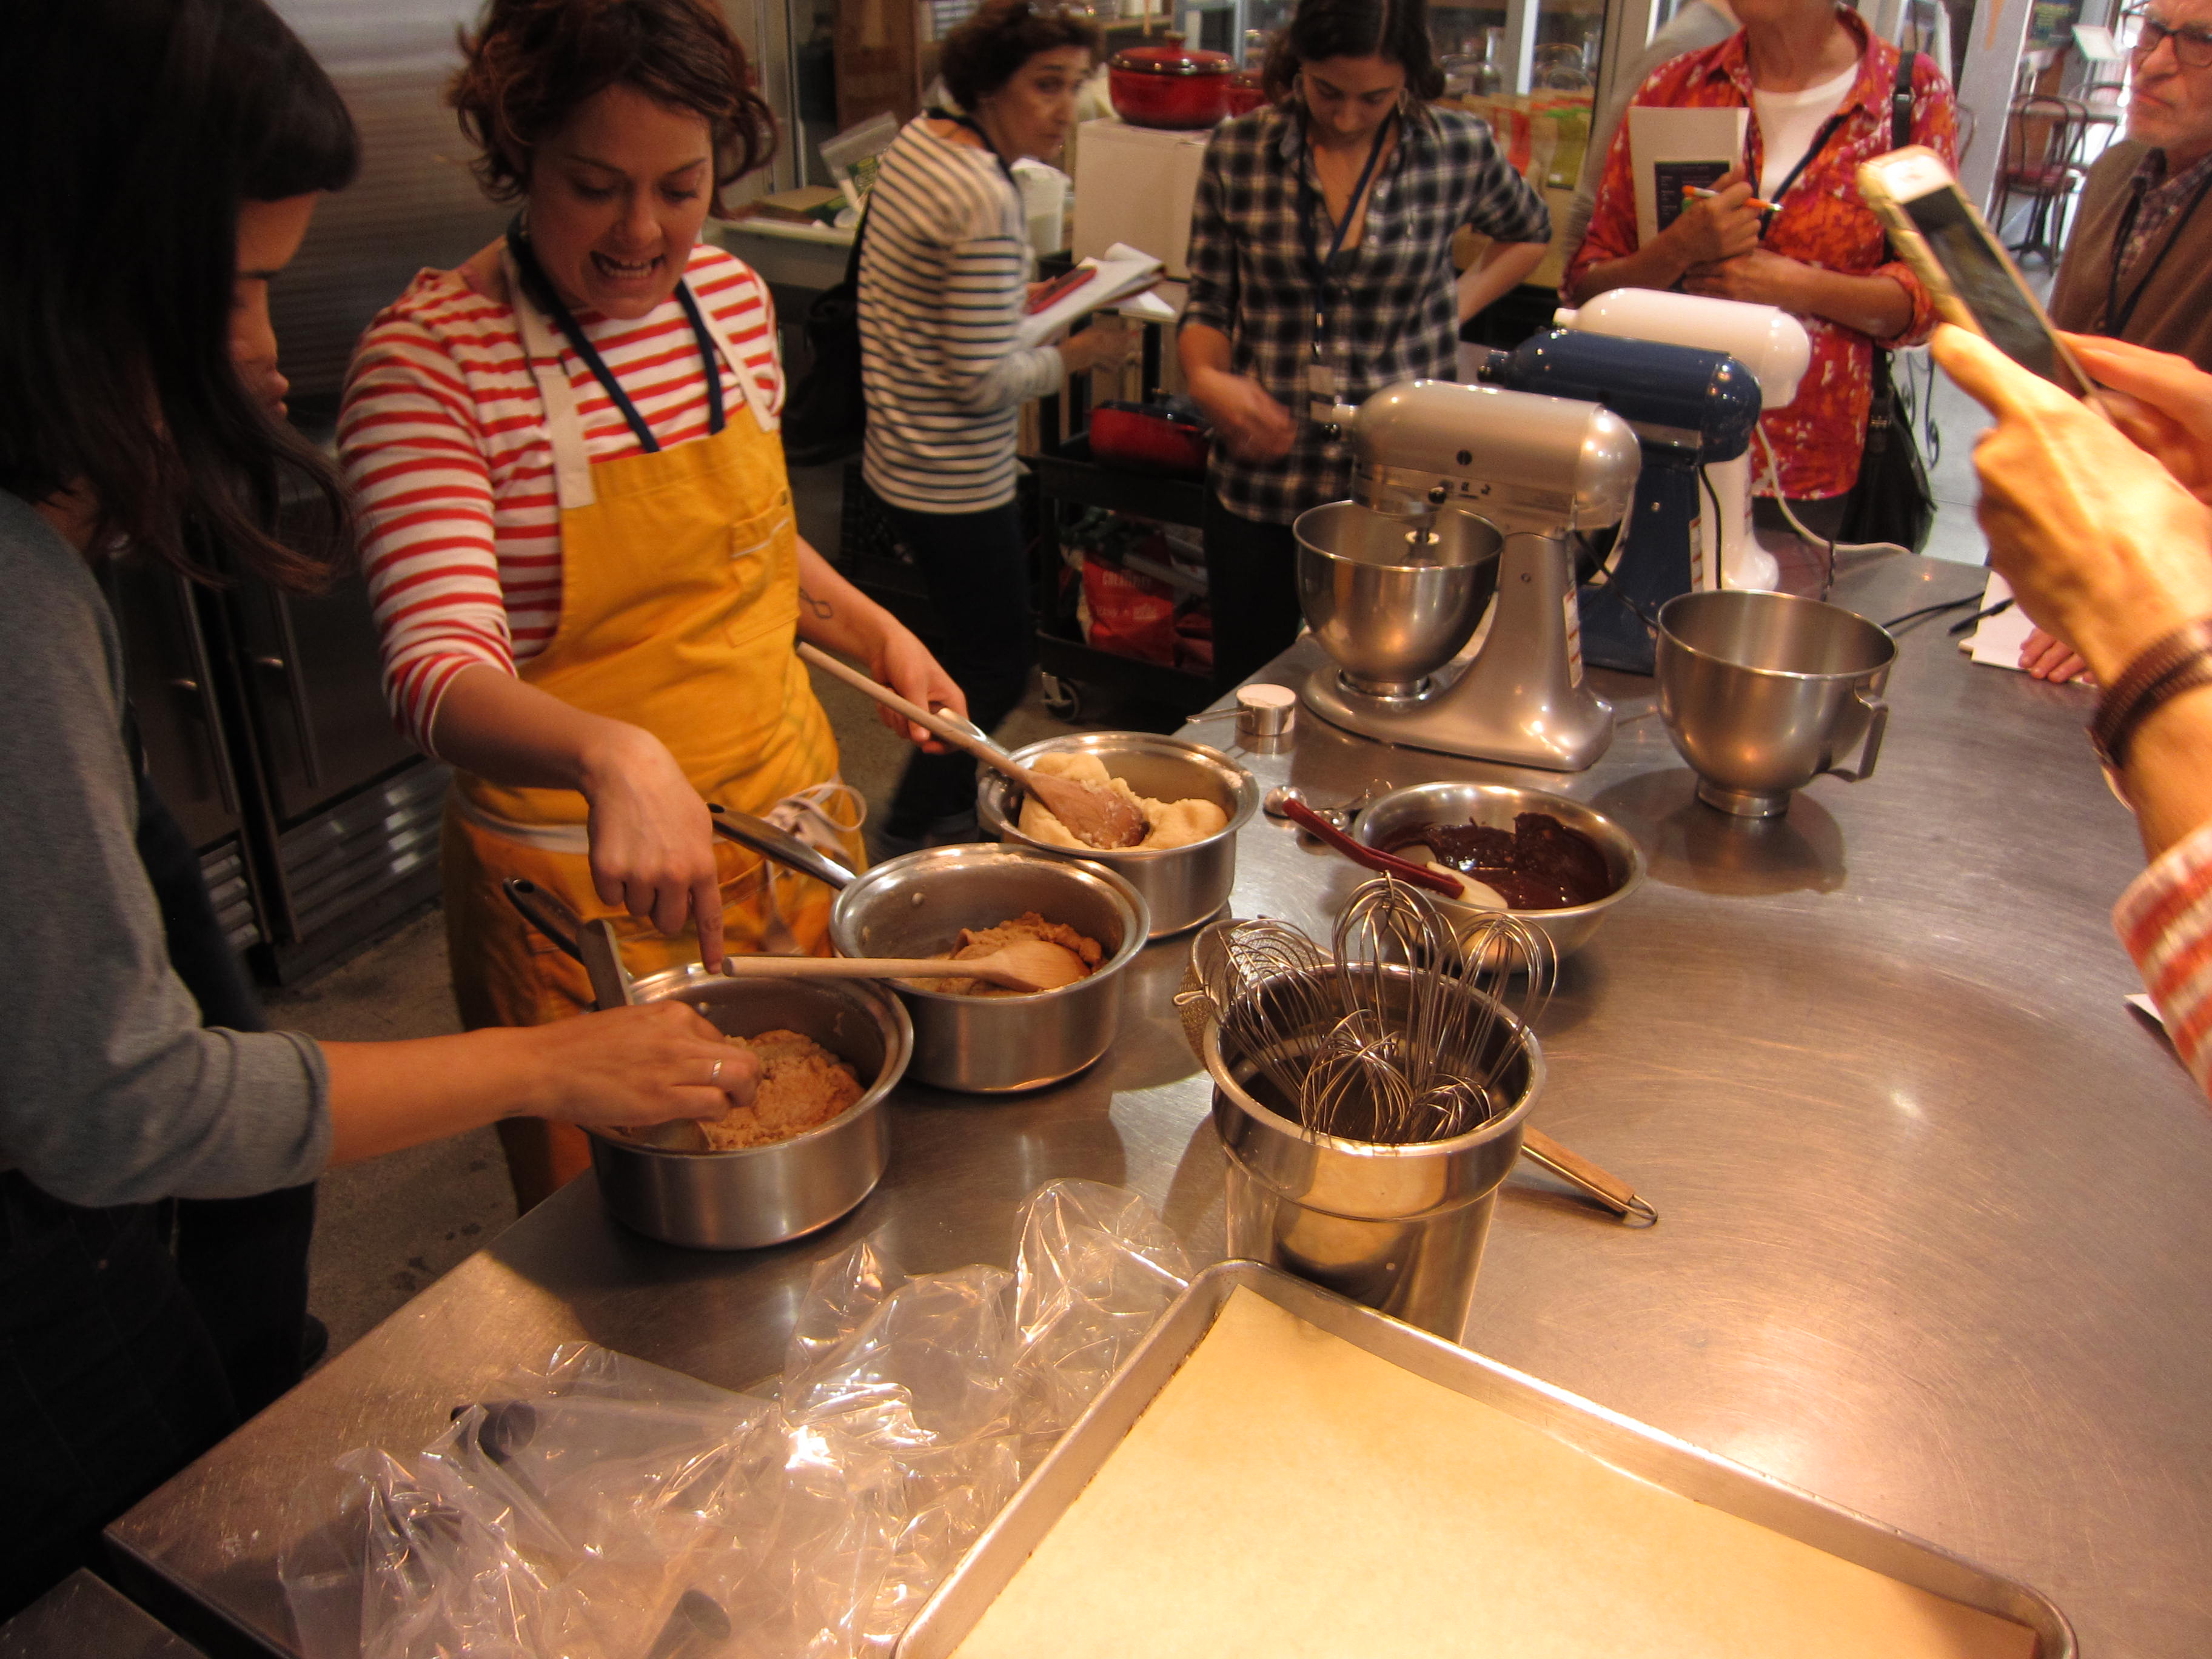 Rose Lawrence coaches us on baking with 3 different whole grains. 